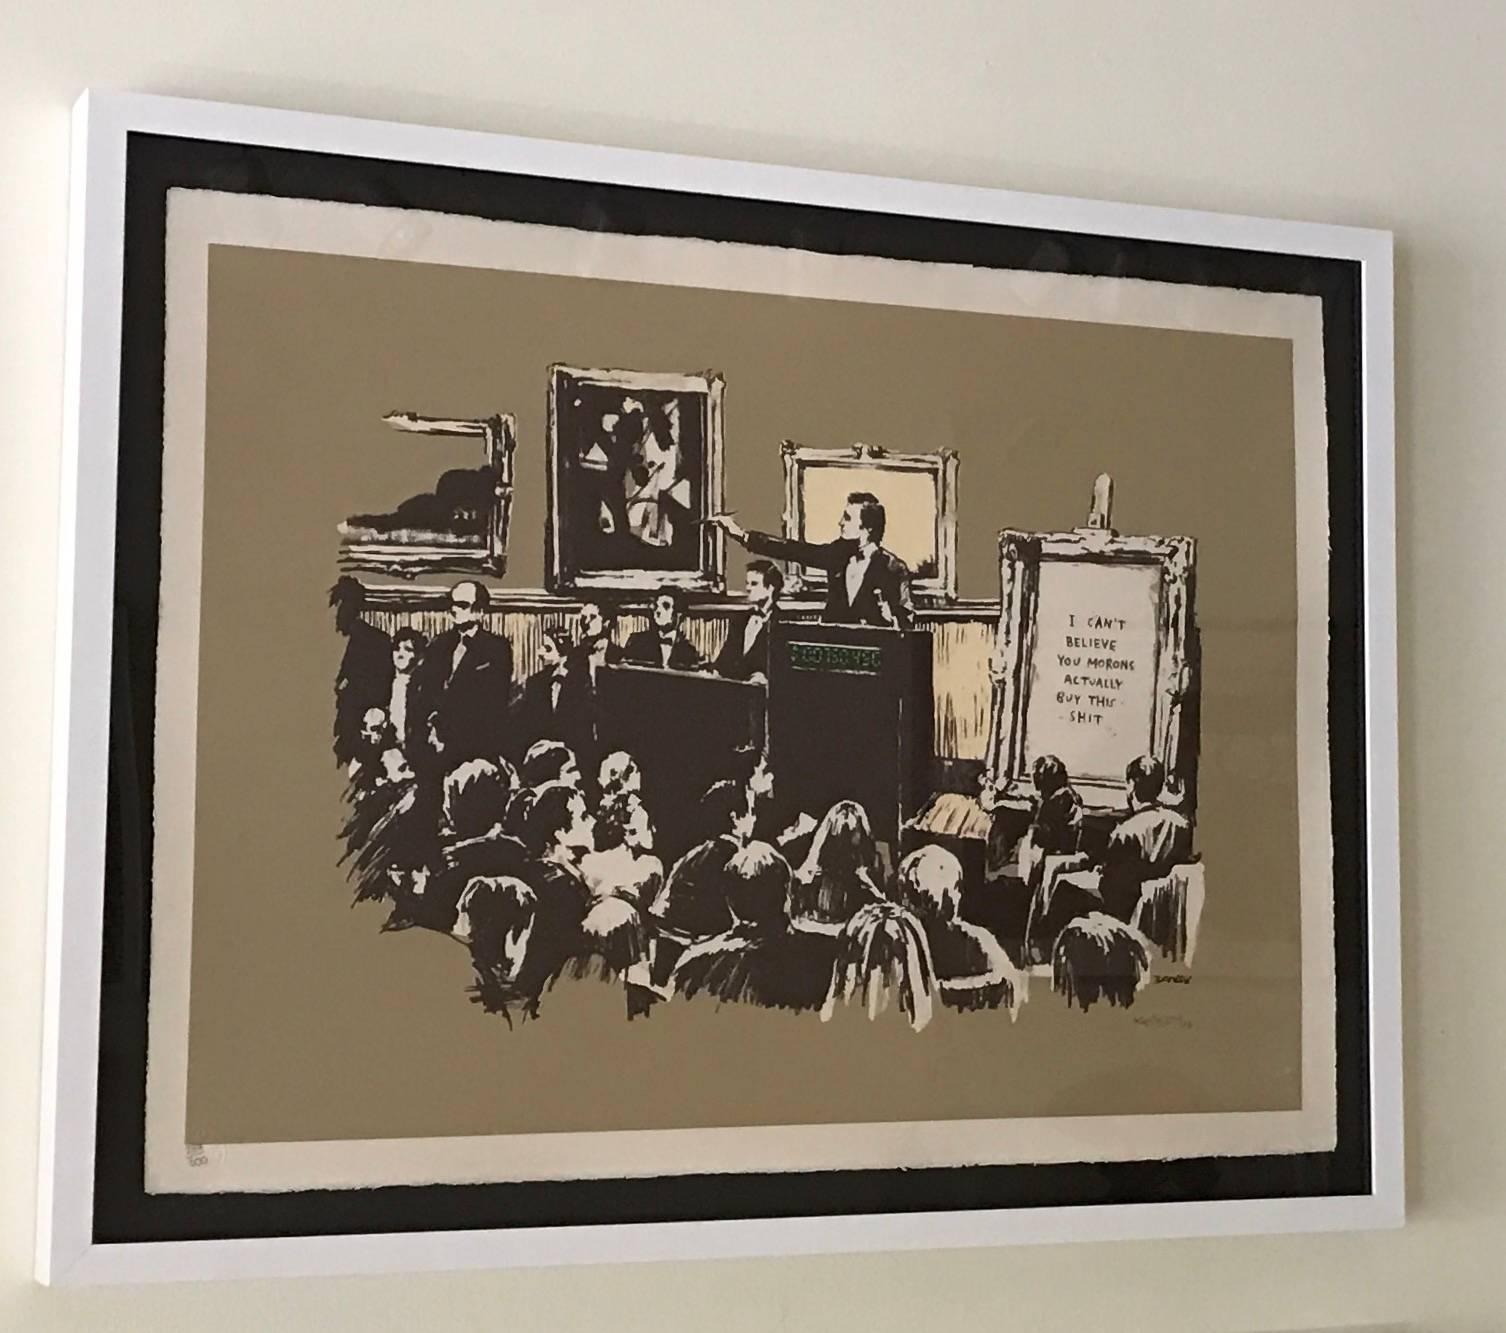 From the signed and numbered edition of 300. Printed and published by Pictures on Walls.  Accompanied by a certificate of authenticity issued by Pest Control Office.